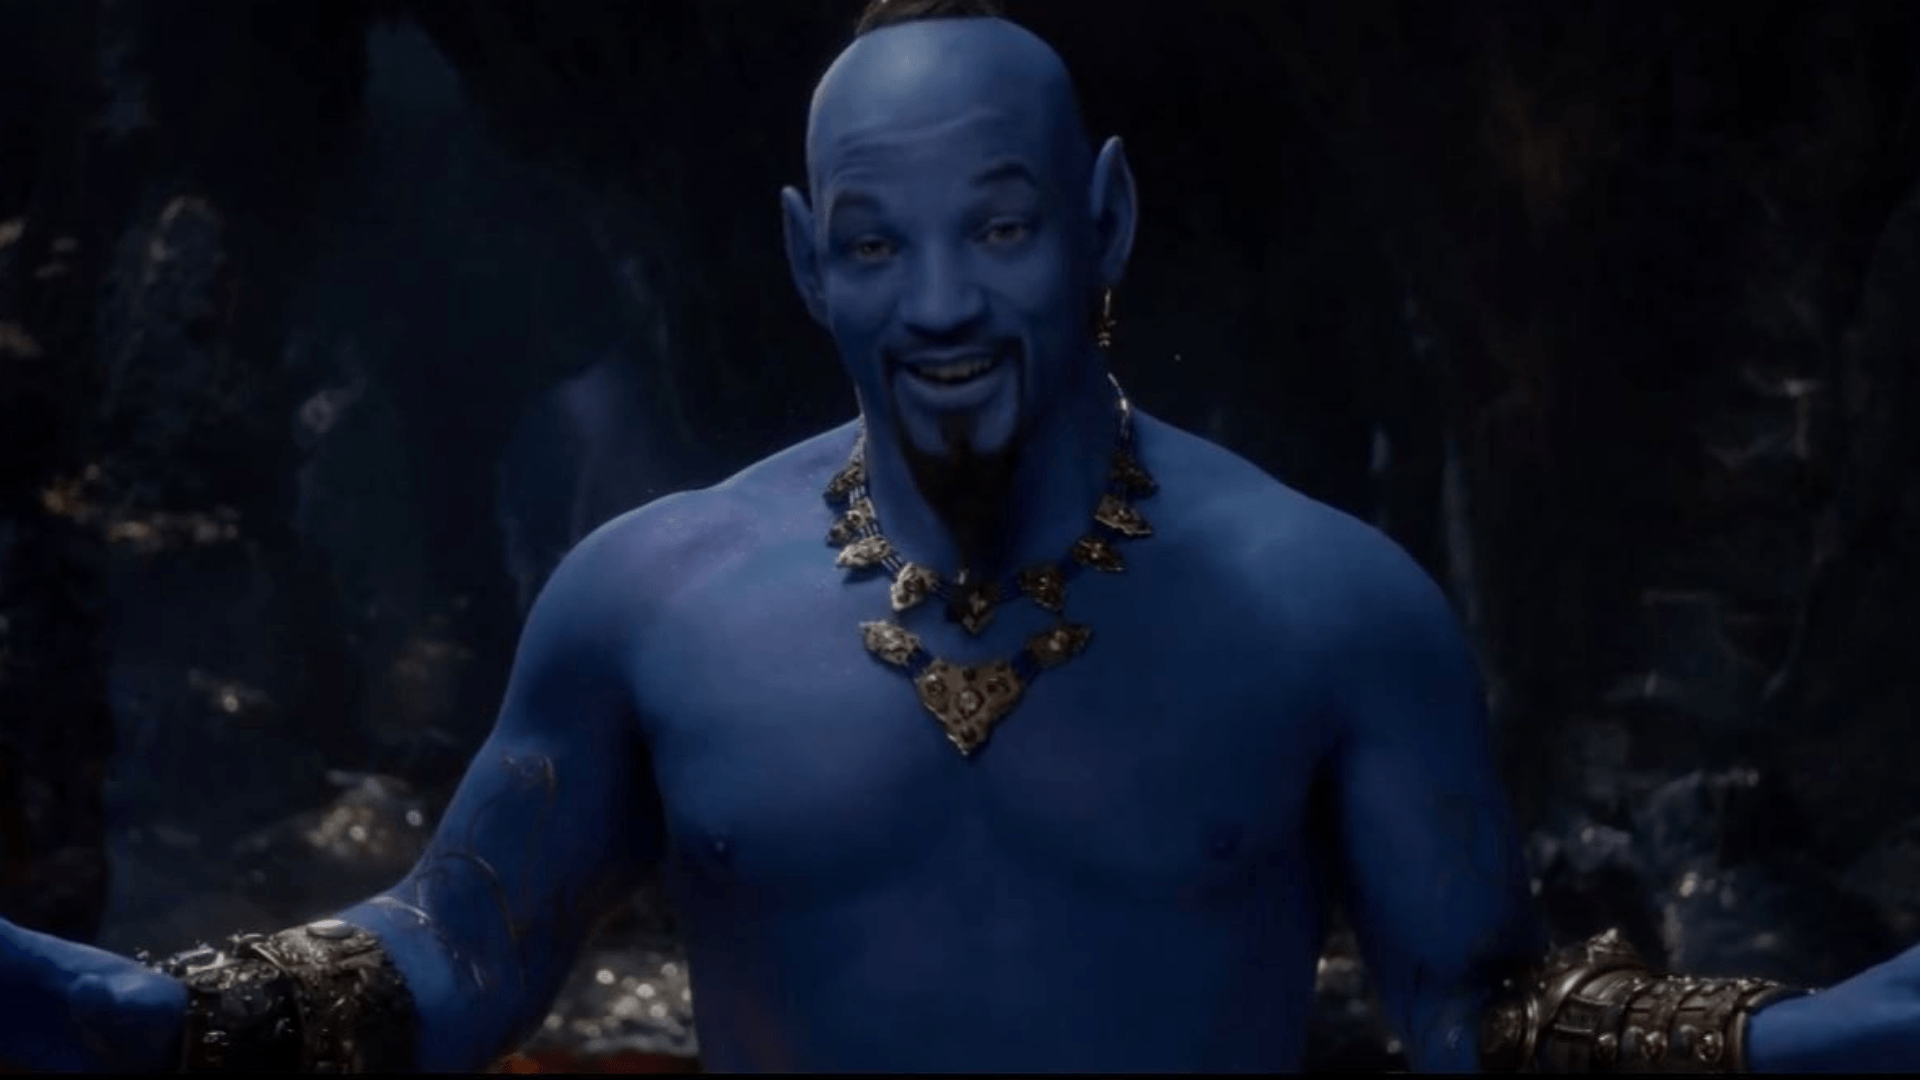 WATCH: 'Aladdin' trailer released during Grammys and, yes, Will